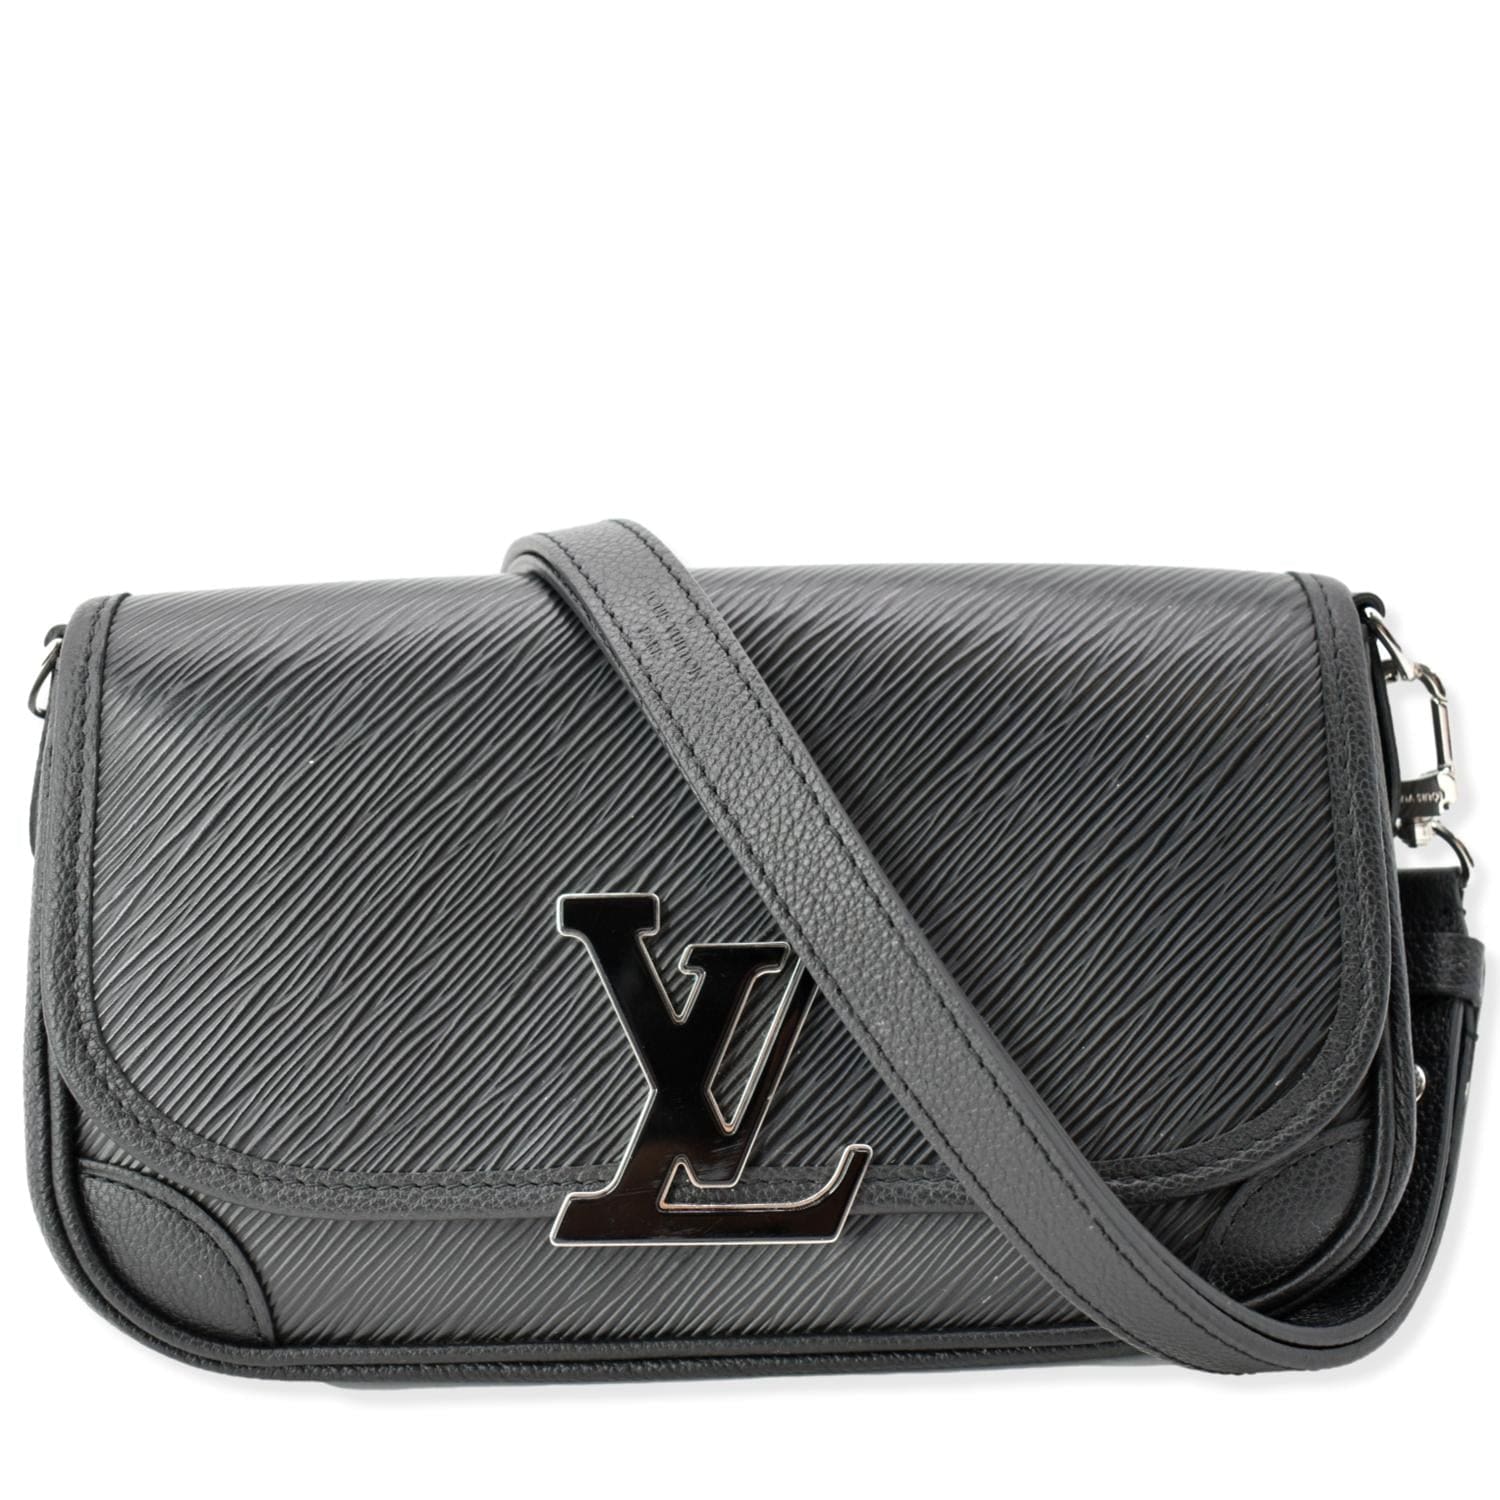 The new Louis Vuitton Buci in Epi leather - best value for money